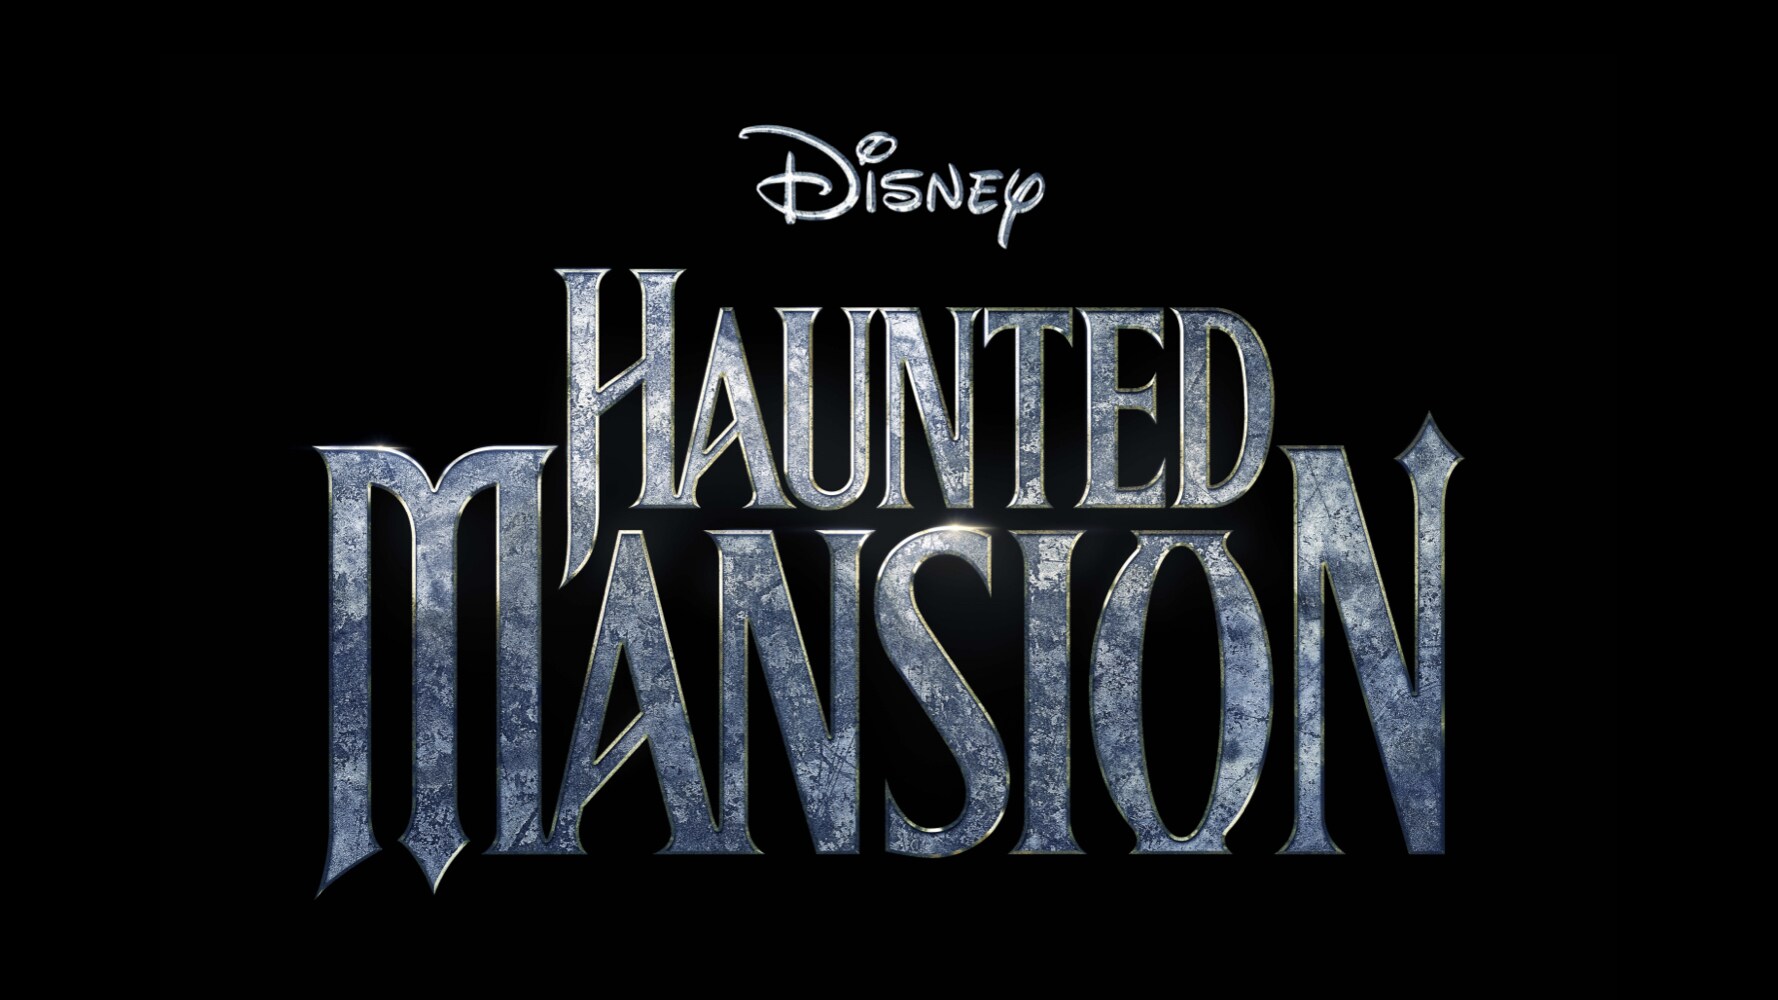 Disney’s Frighteningly Fun Adventure “Haunted Mansion” Debuts On Disney+ And At Digital Retailers October 4